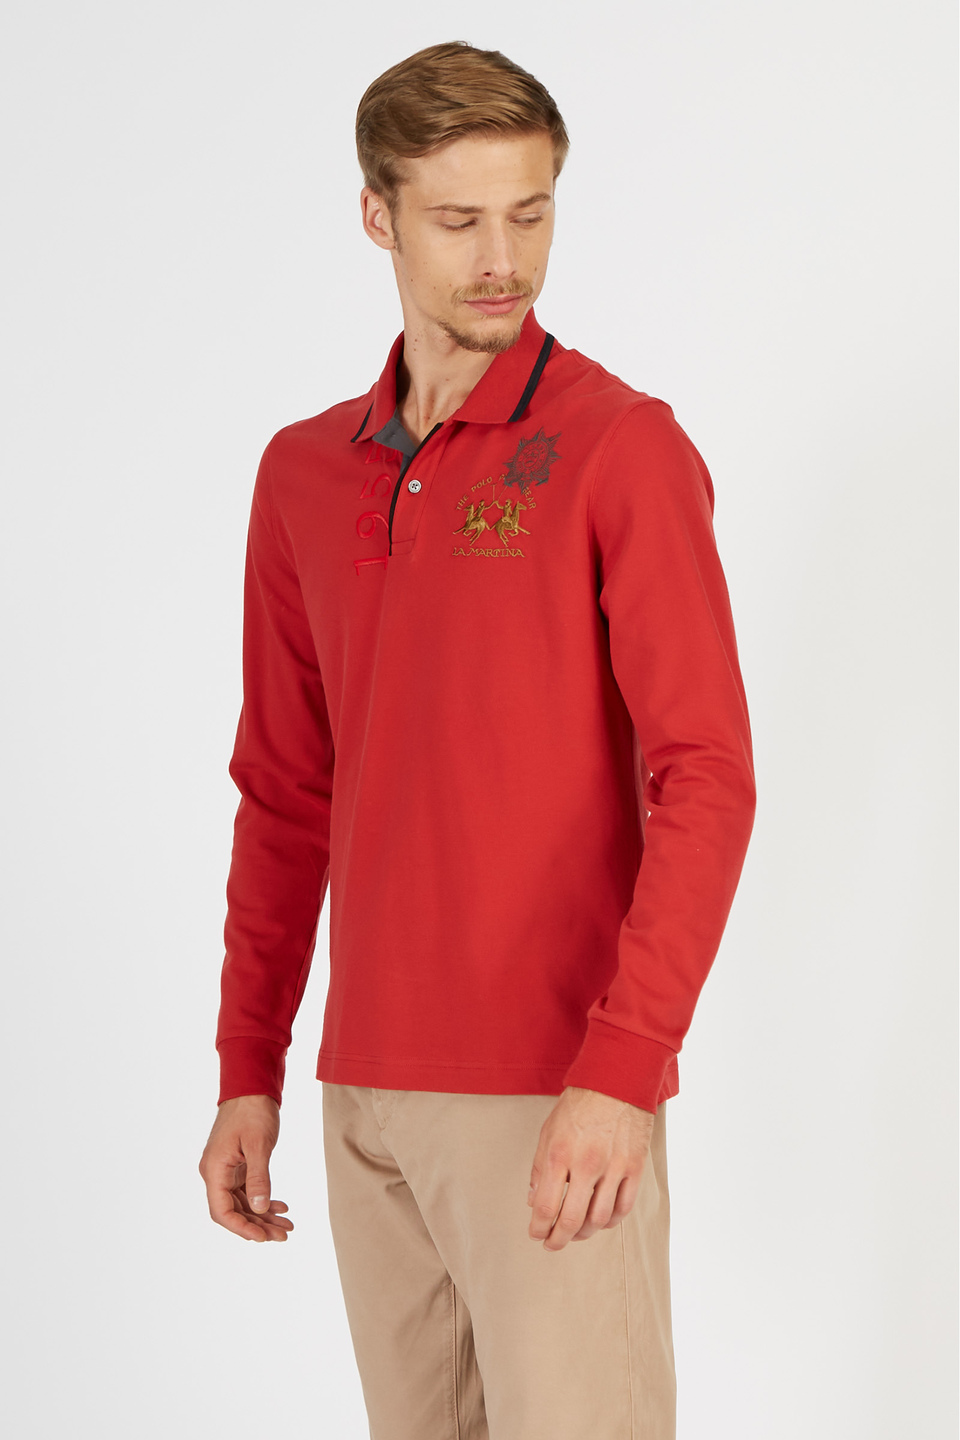 Men’s Polo Guards with long sleeves in regular fit stretch piqué cotton | La Martina - Official Online Shop